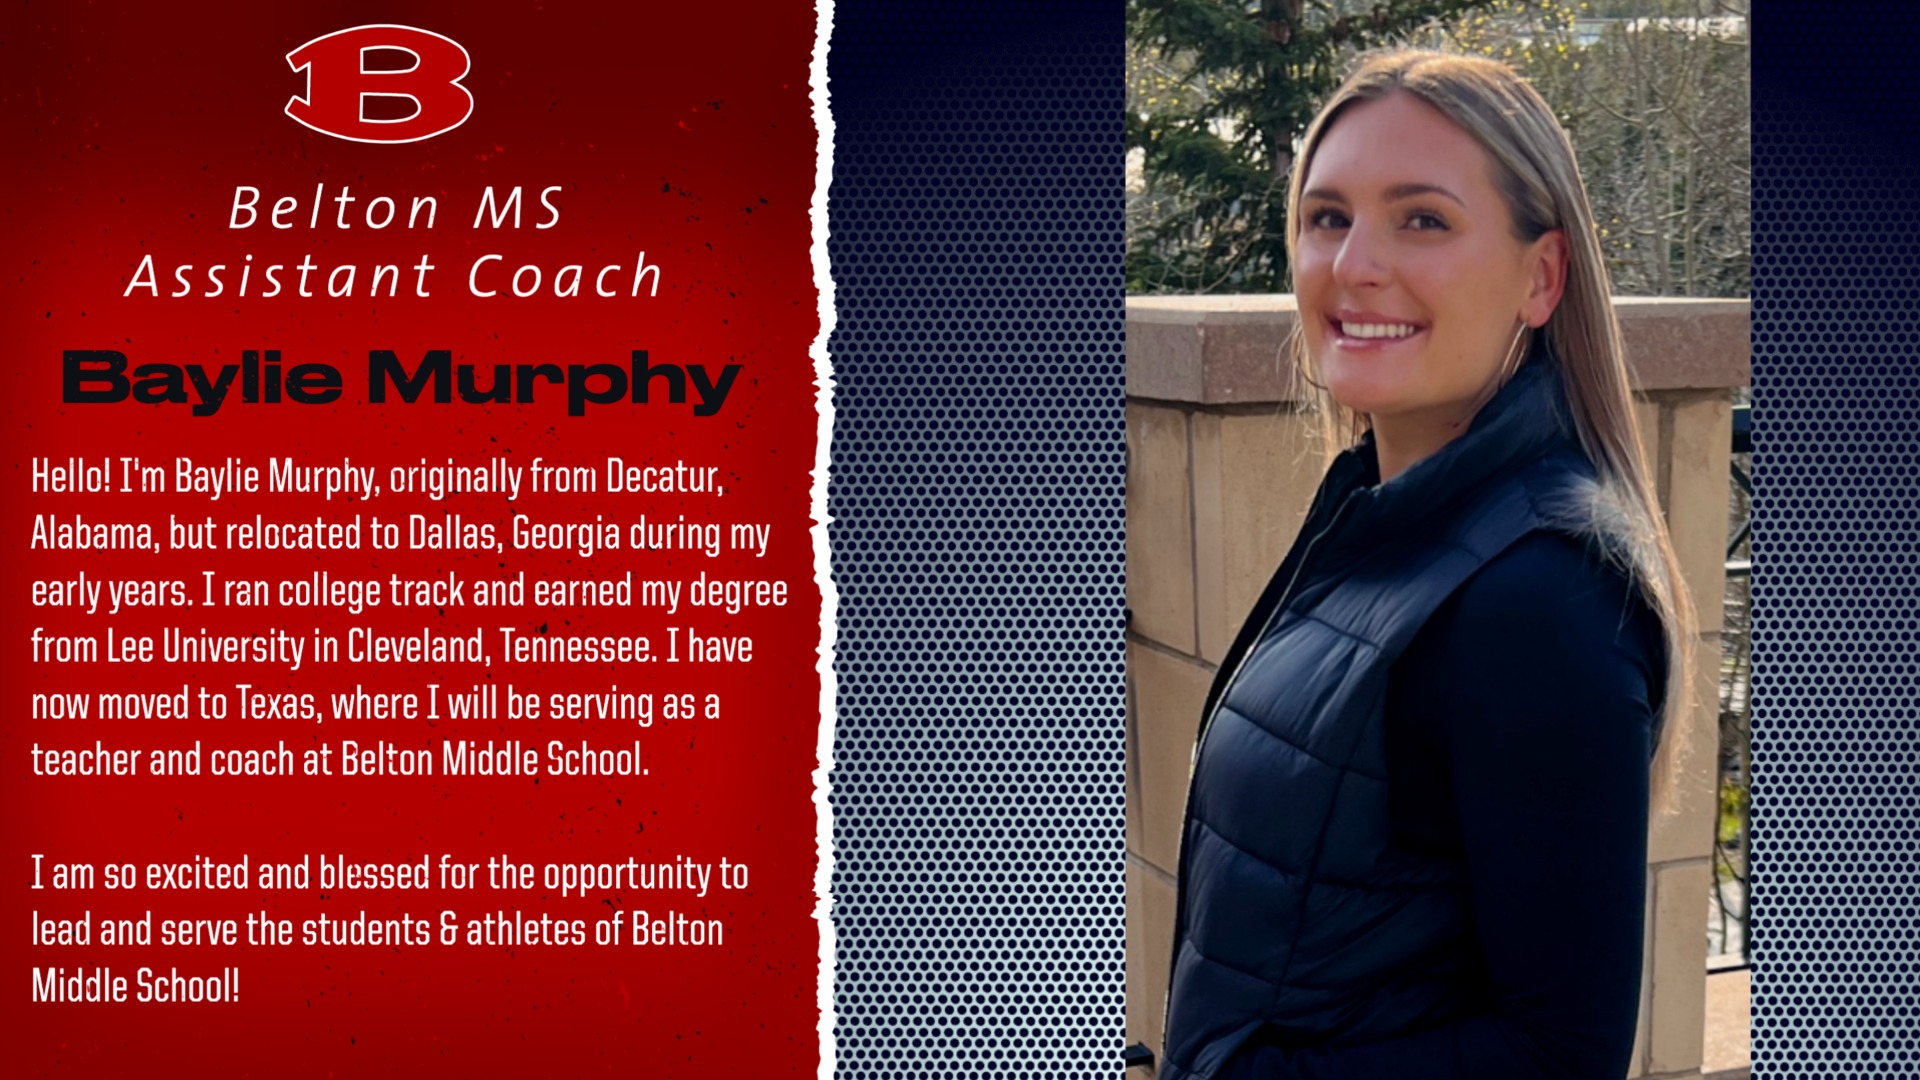 Slide 1 - New Hire at BMS - Baylie Murphy